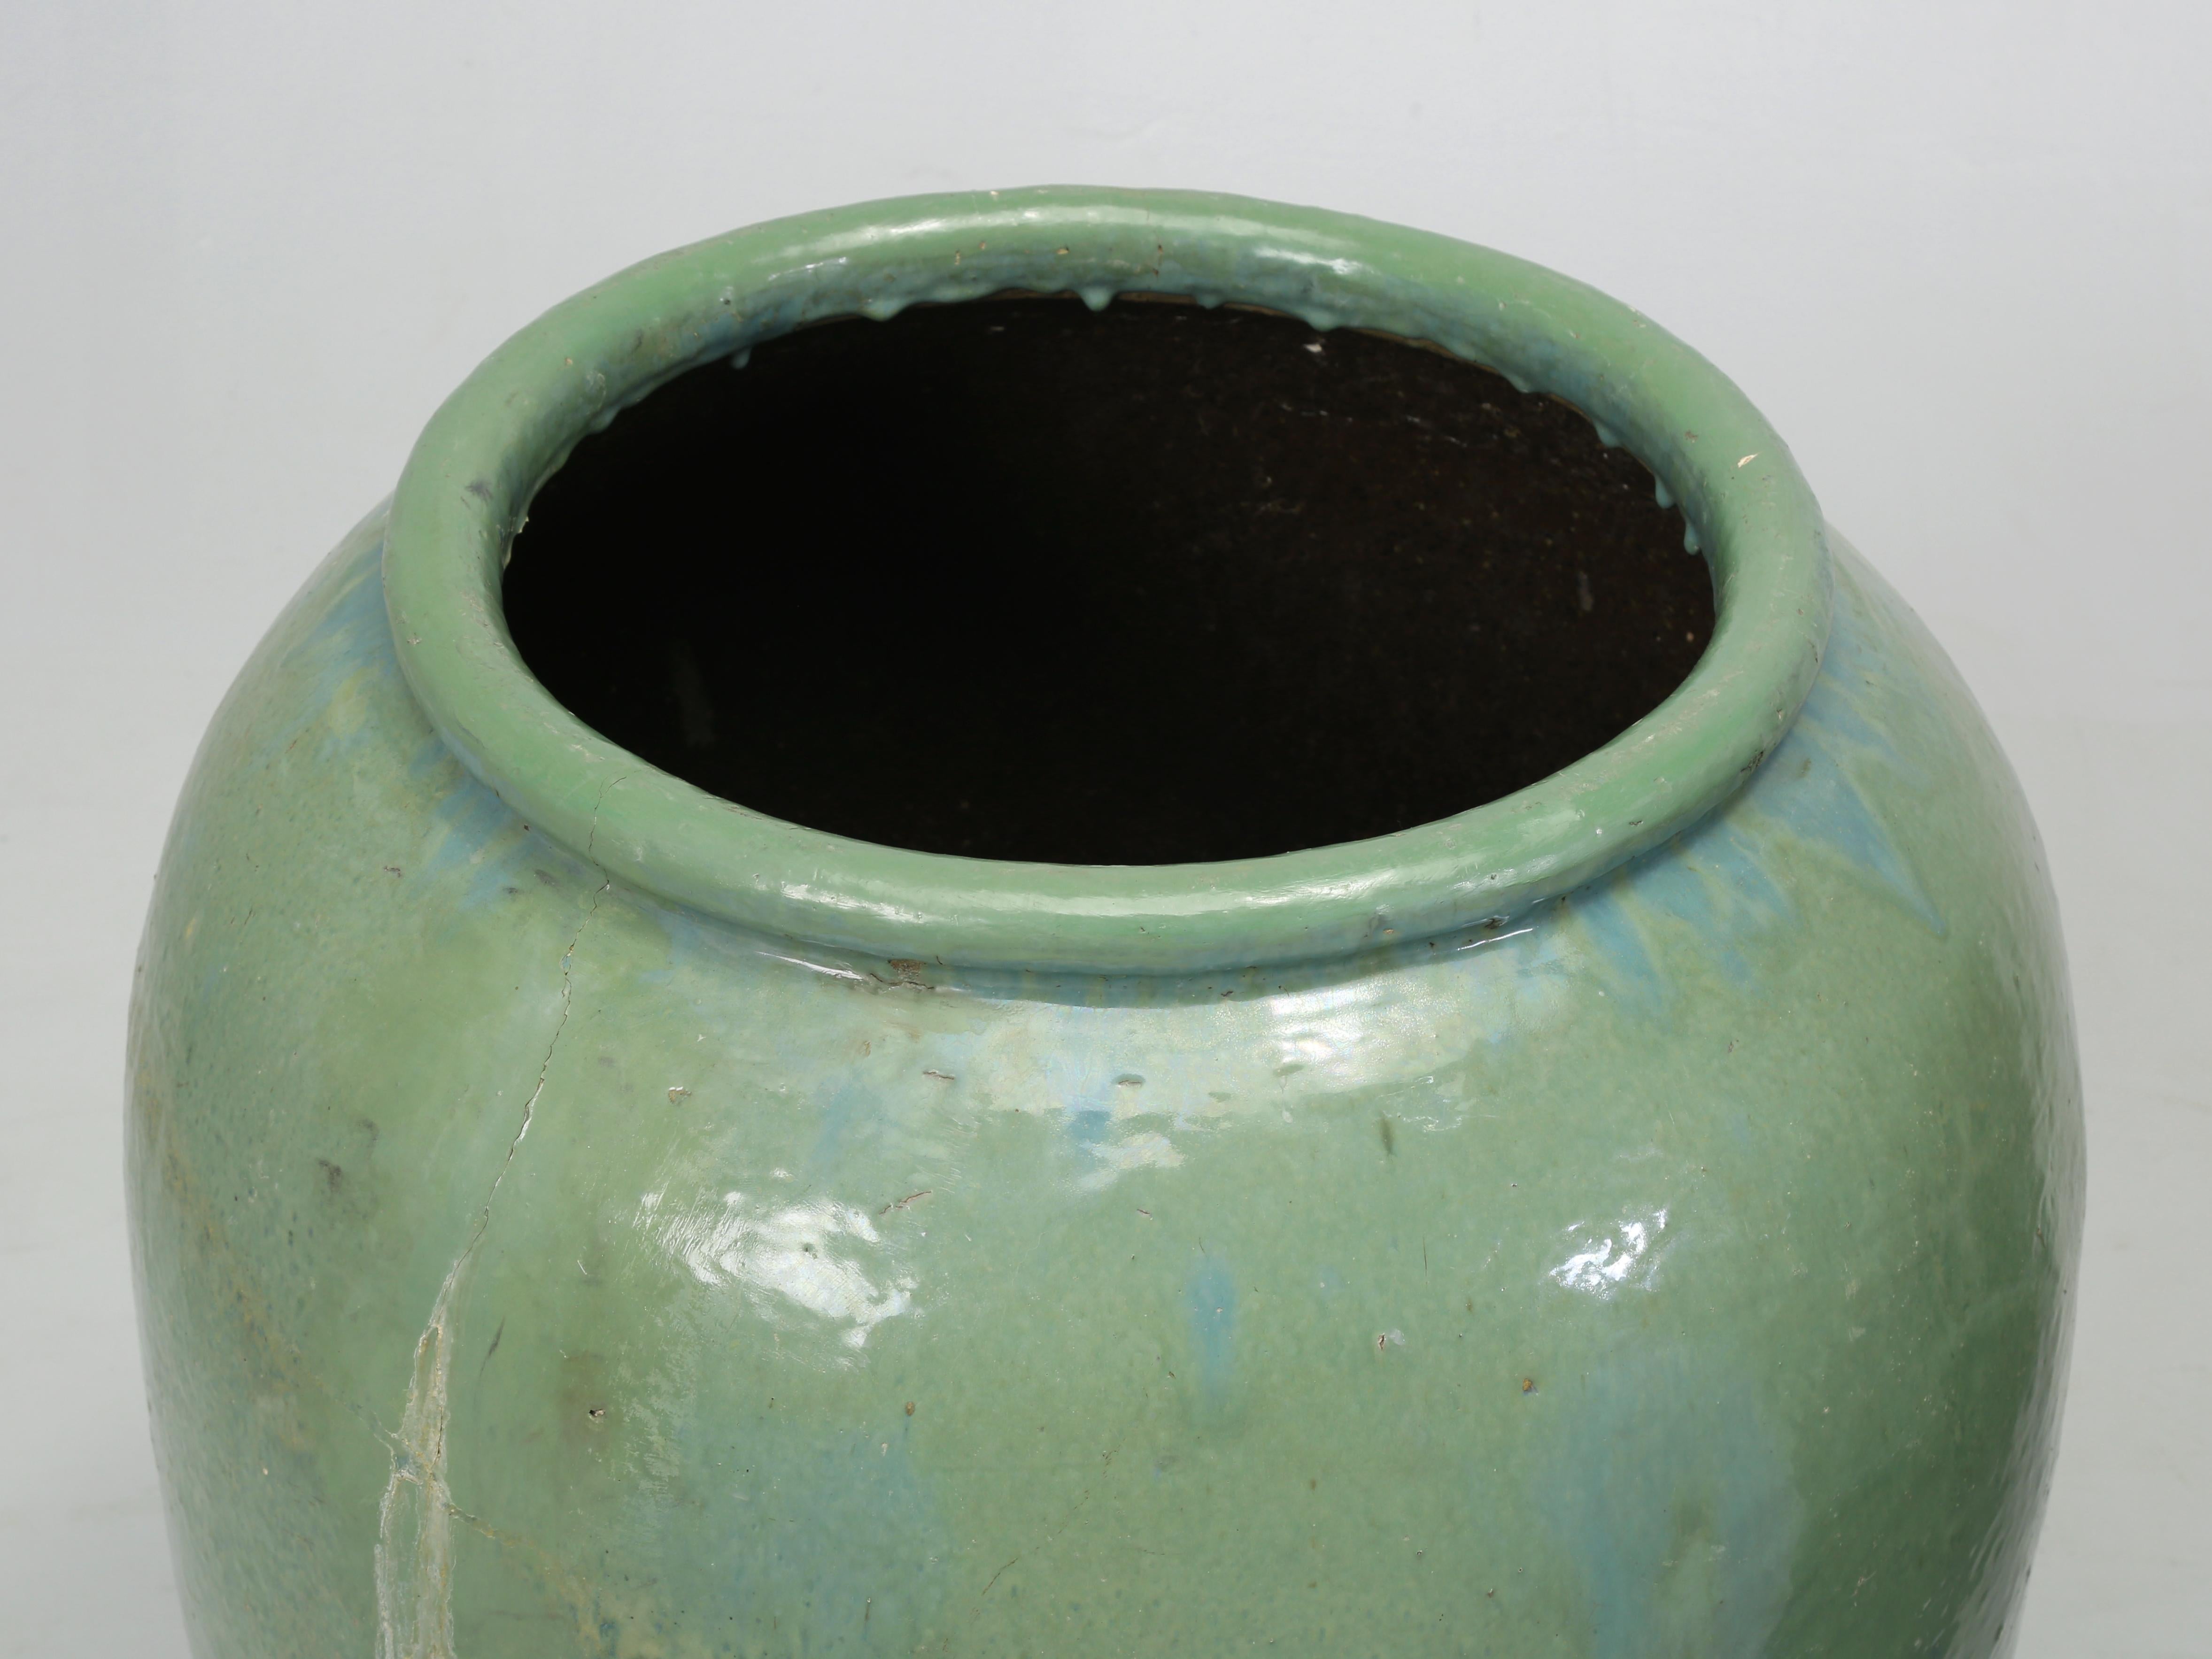 Terracotta Glazed Green Vintage Garden Planters Imported from Ireland We'd call a Near Pair